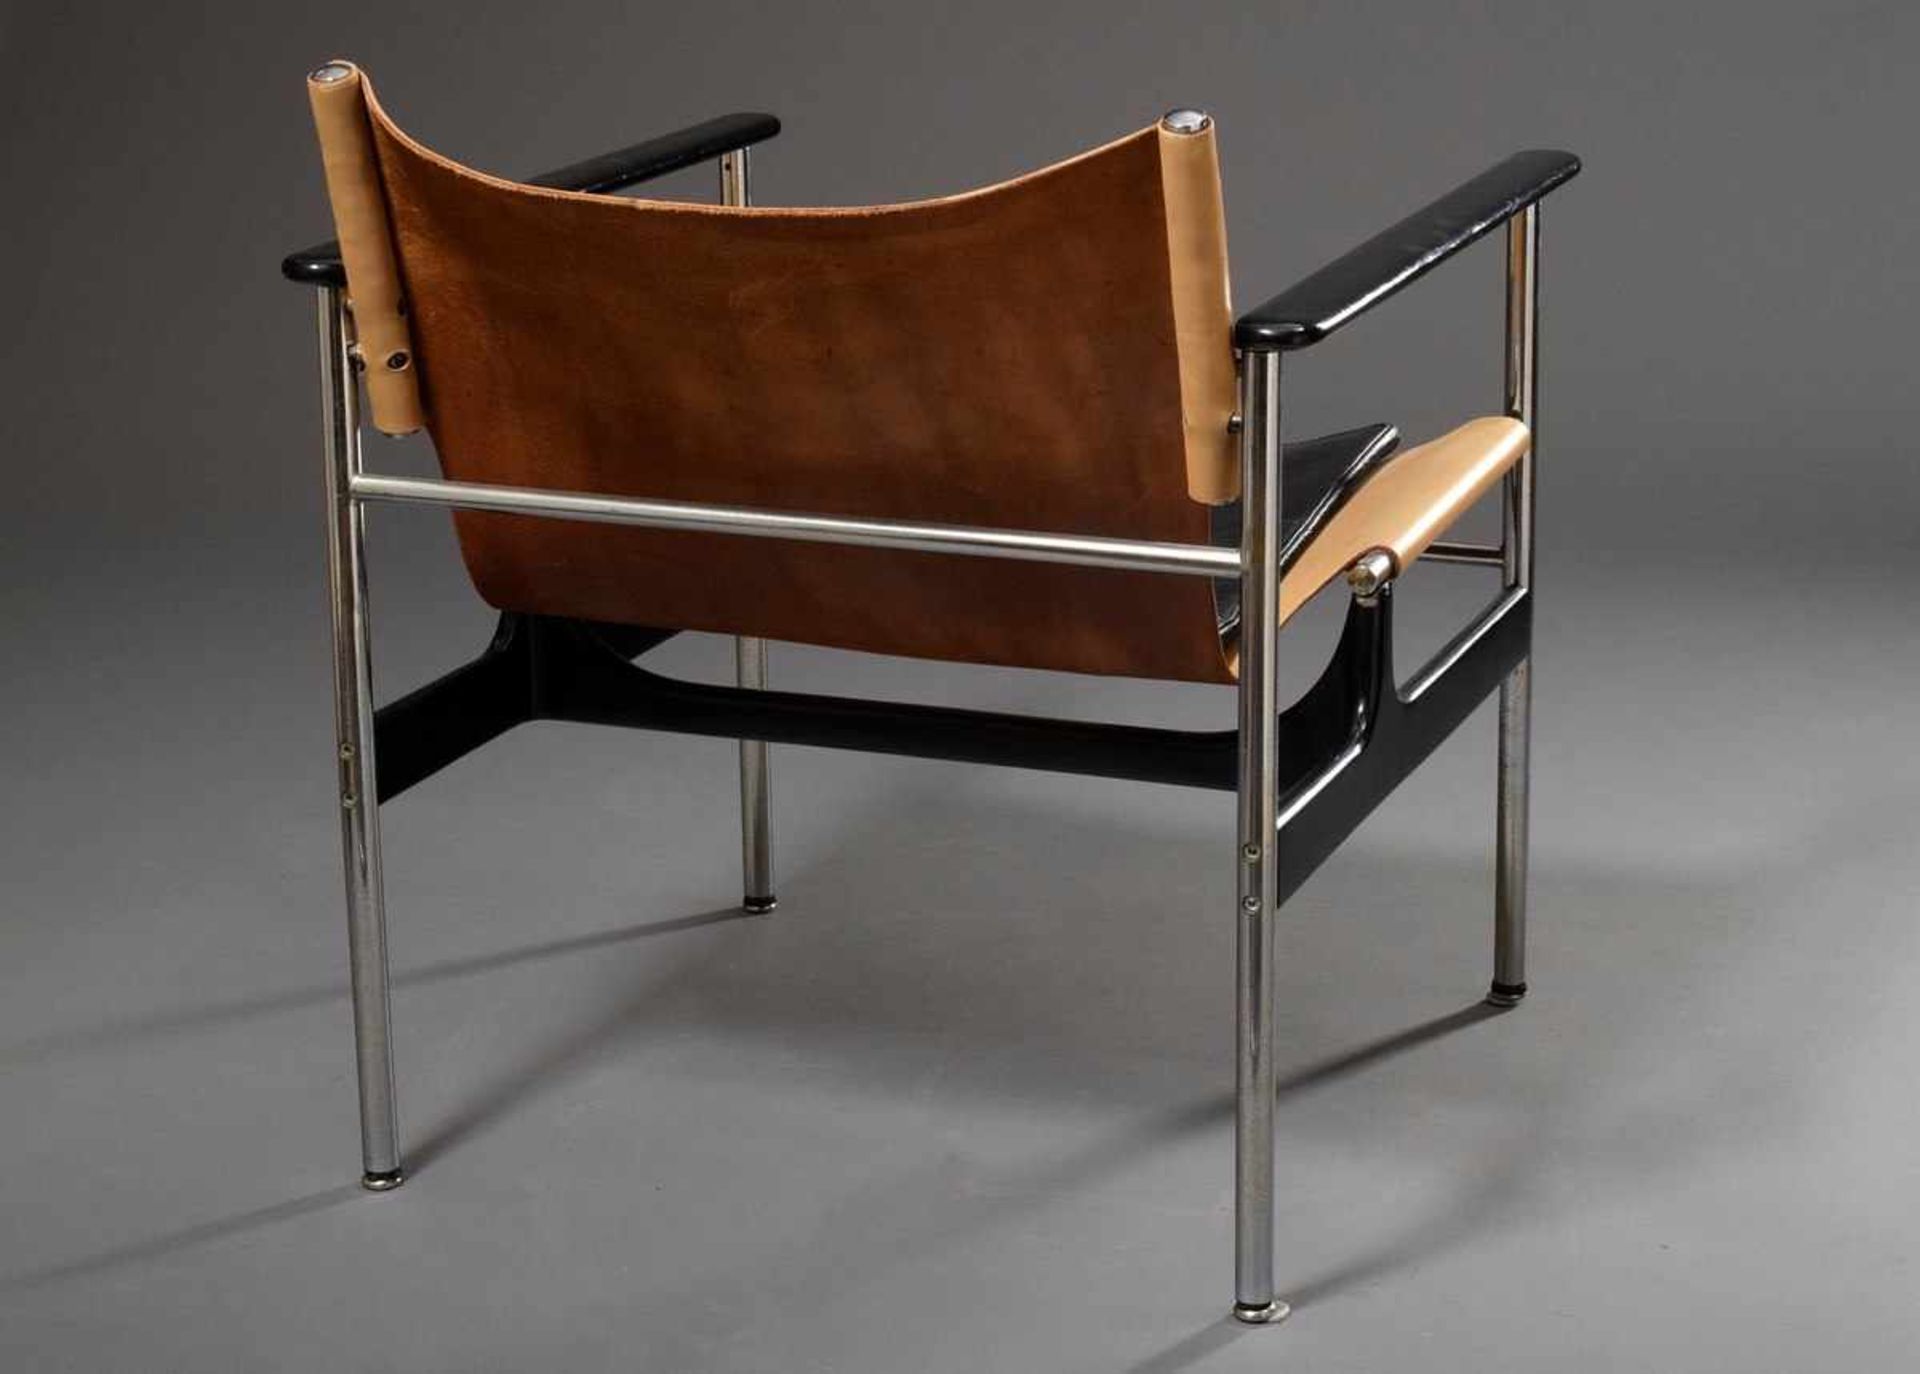 "Sling" Lounge Chair No. 657, designed by Charles Pollock (1930-2013) 1960, tubular steel, leather - Image 3 of 4